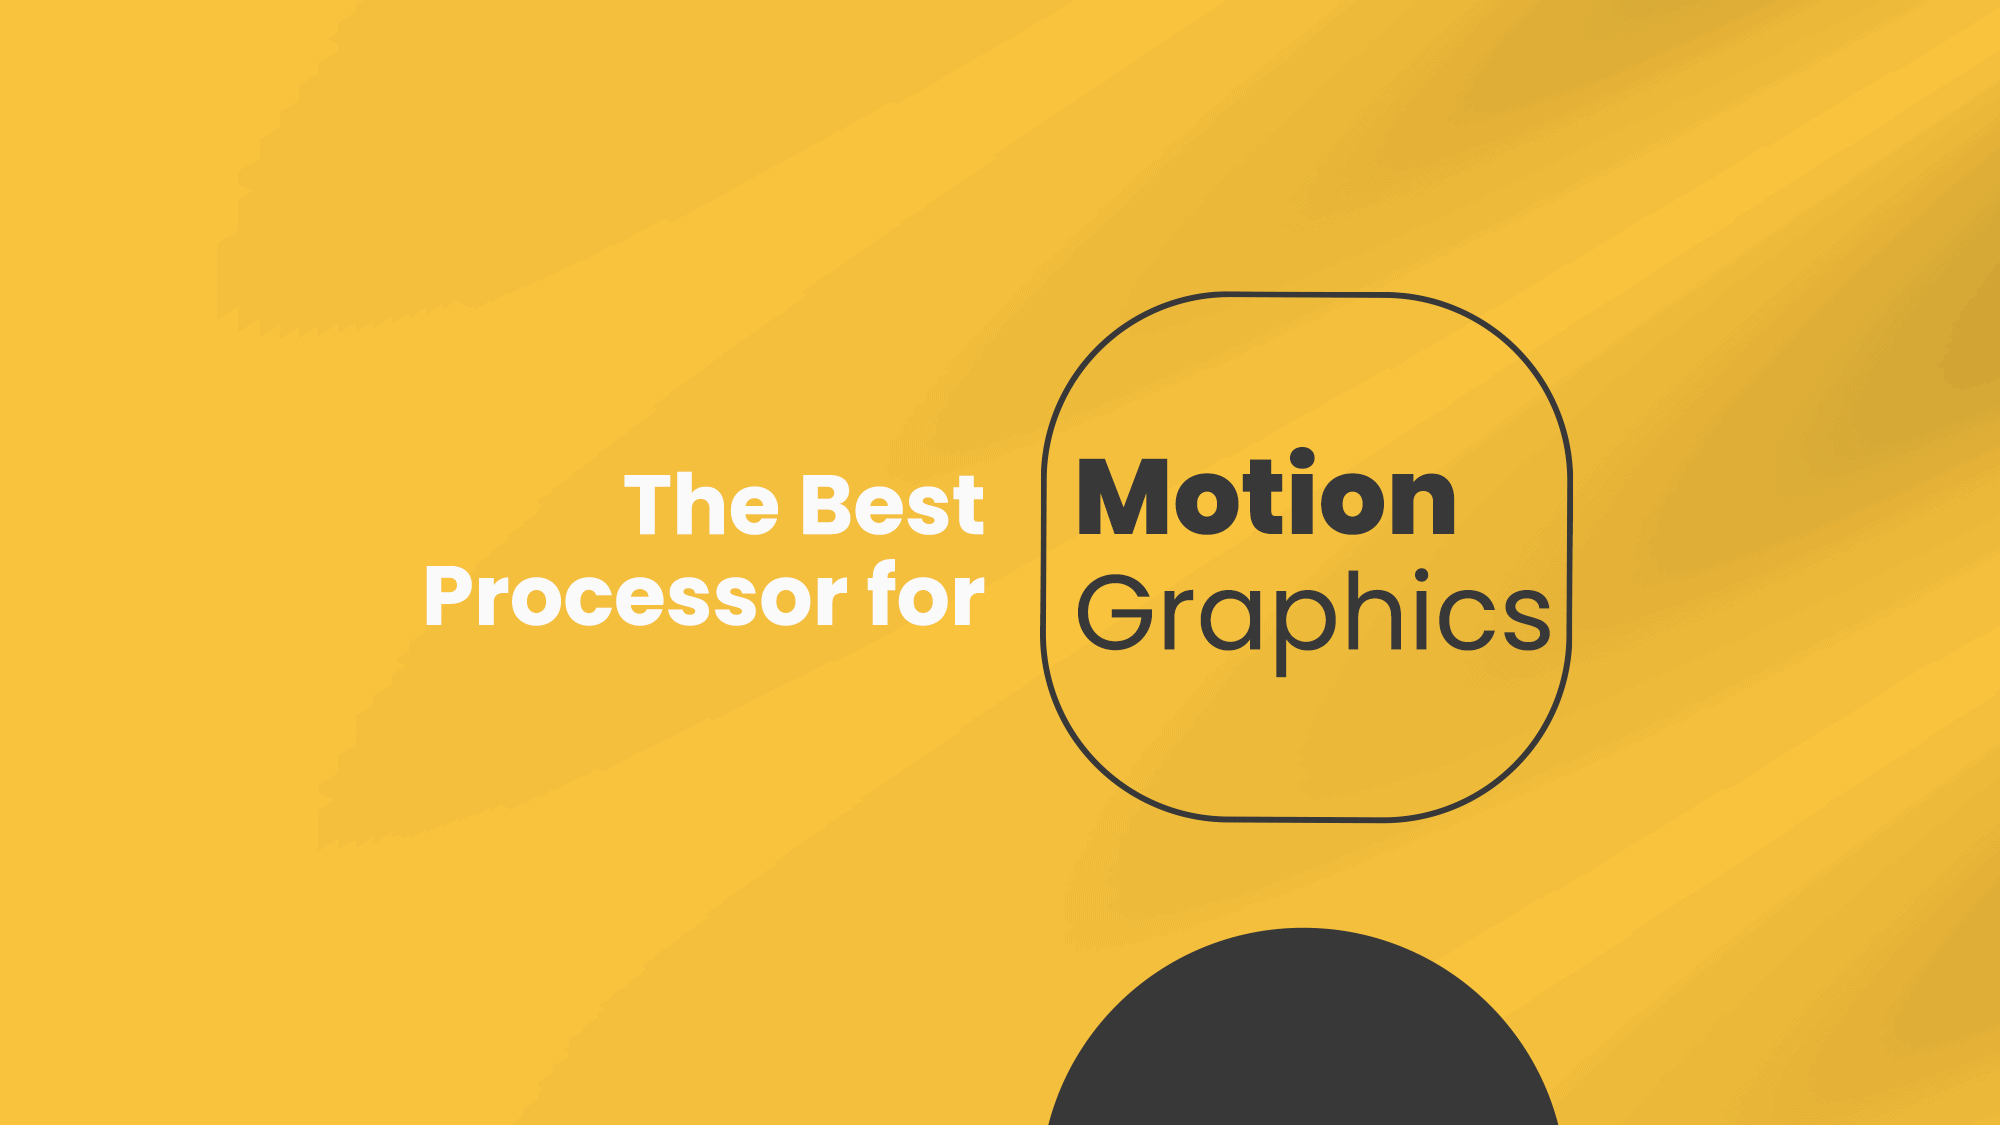 the Best Processor for Motion Graphics